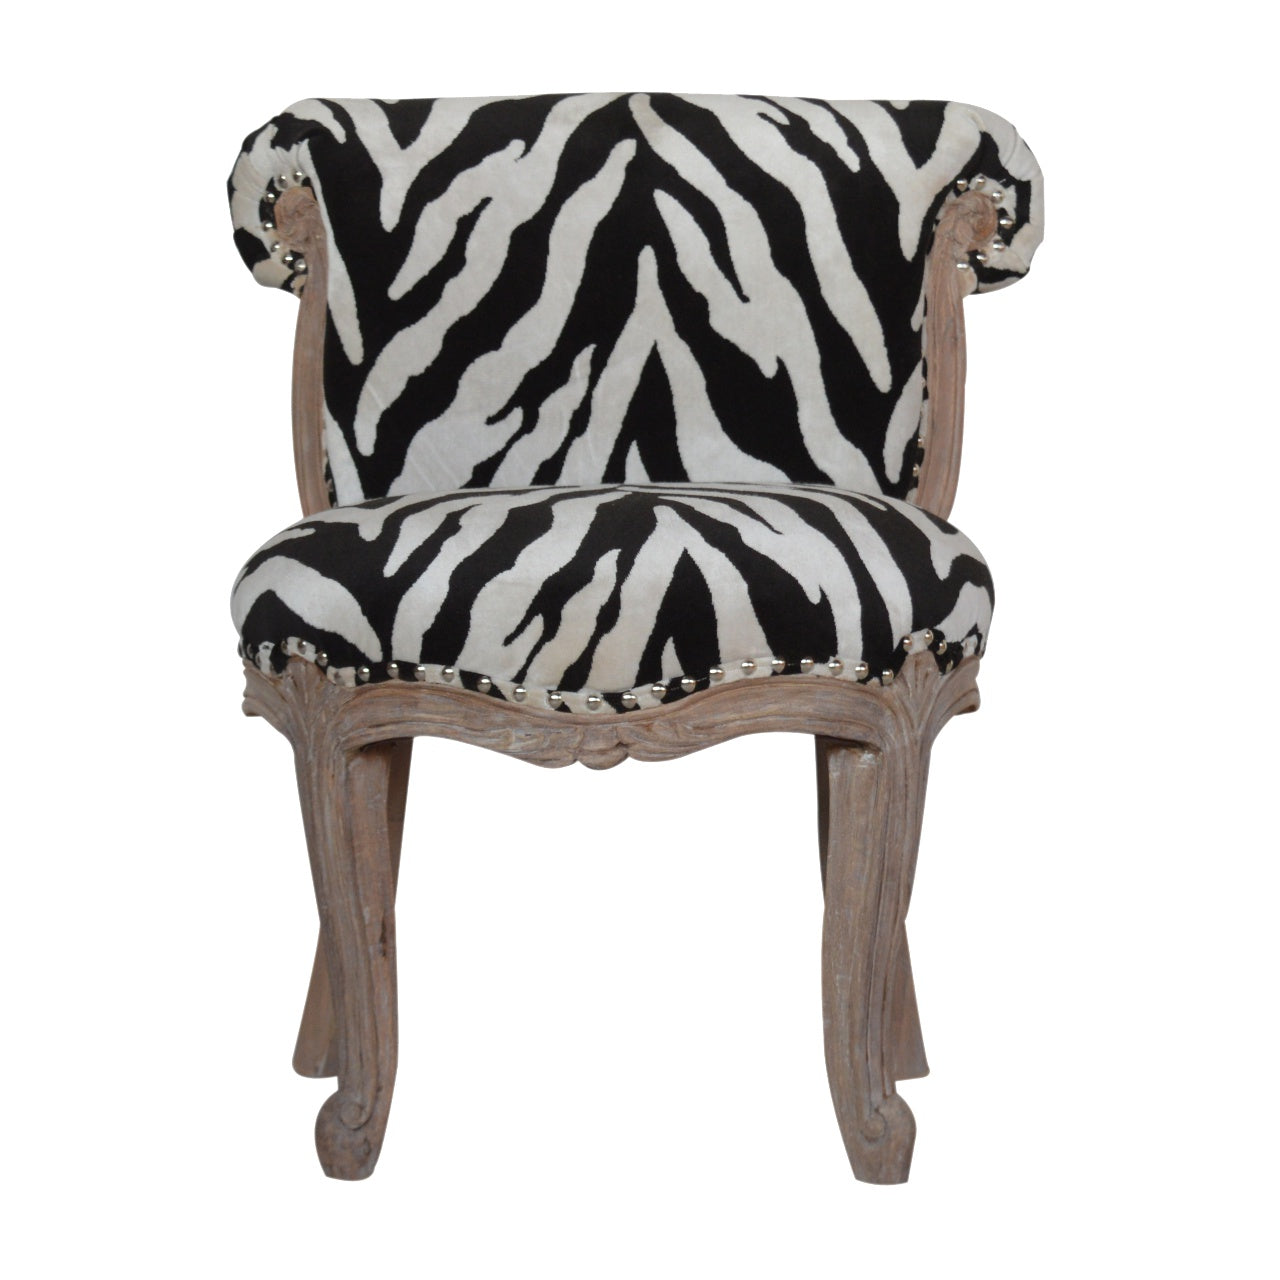 View Zebra Printed Studded Chair information